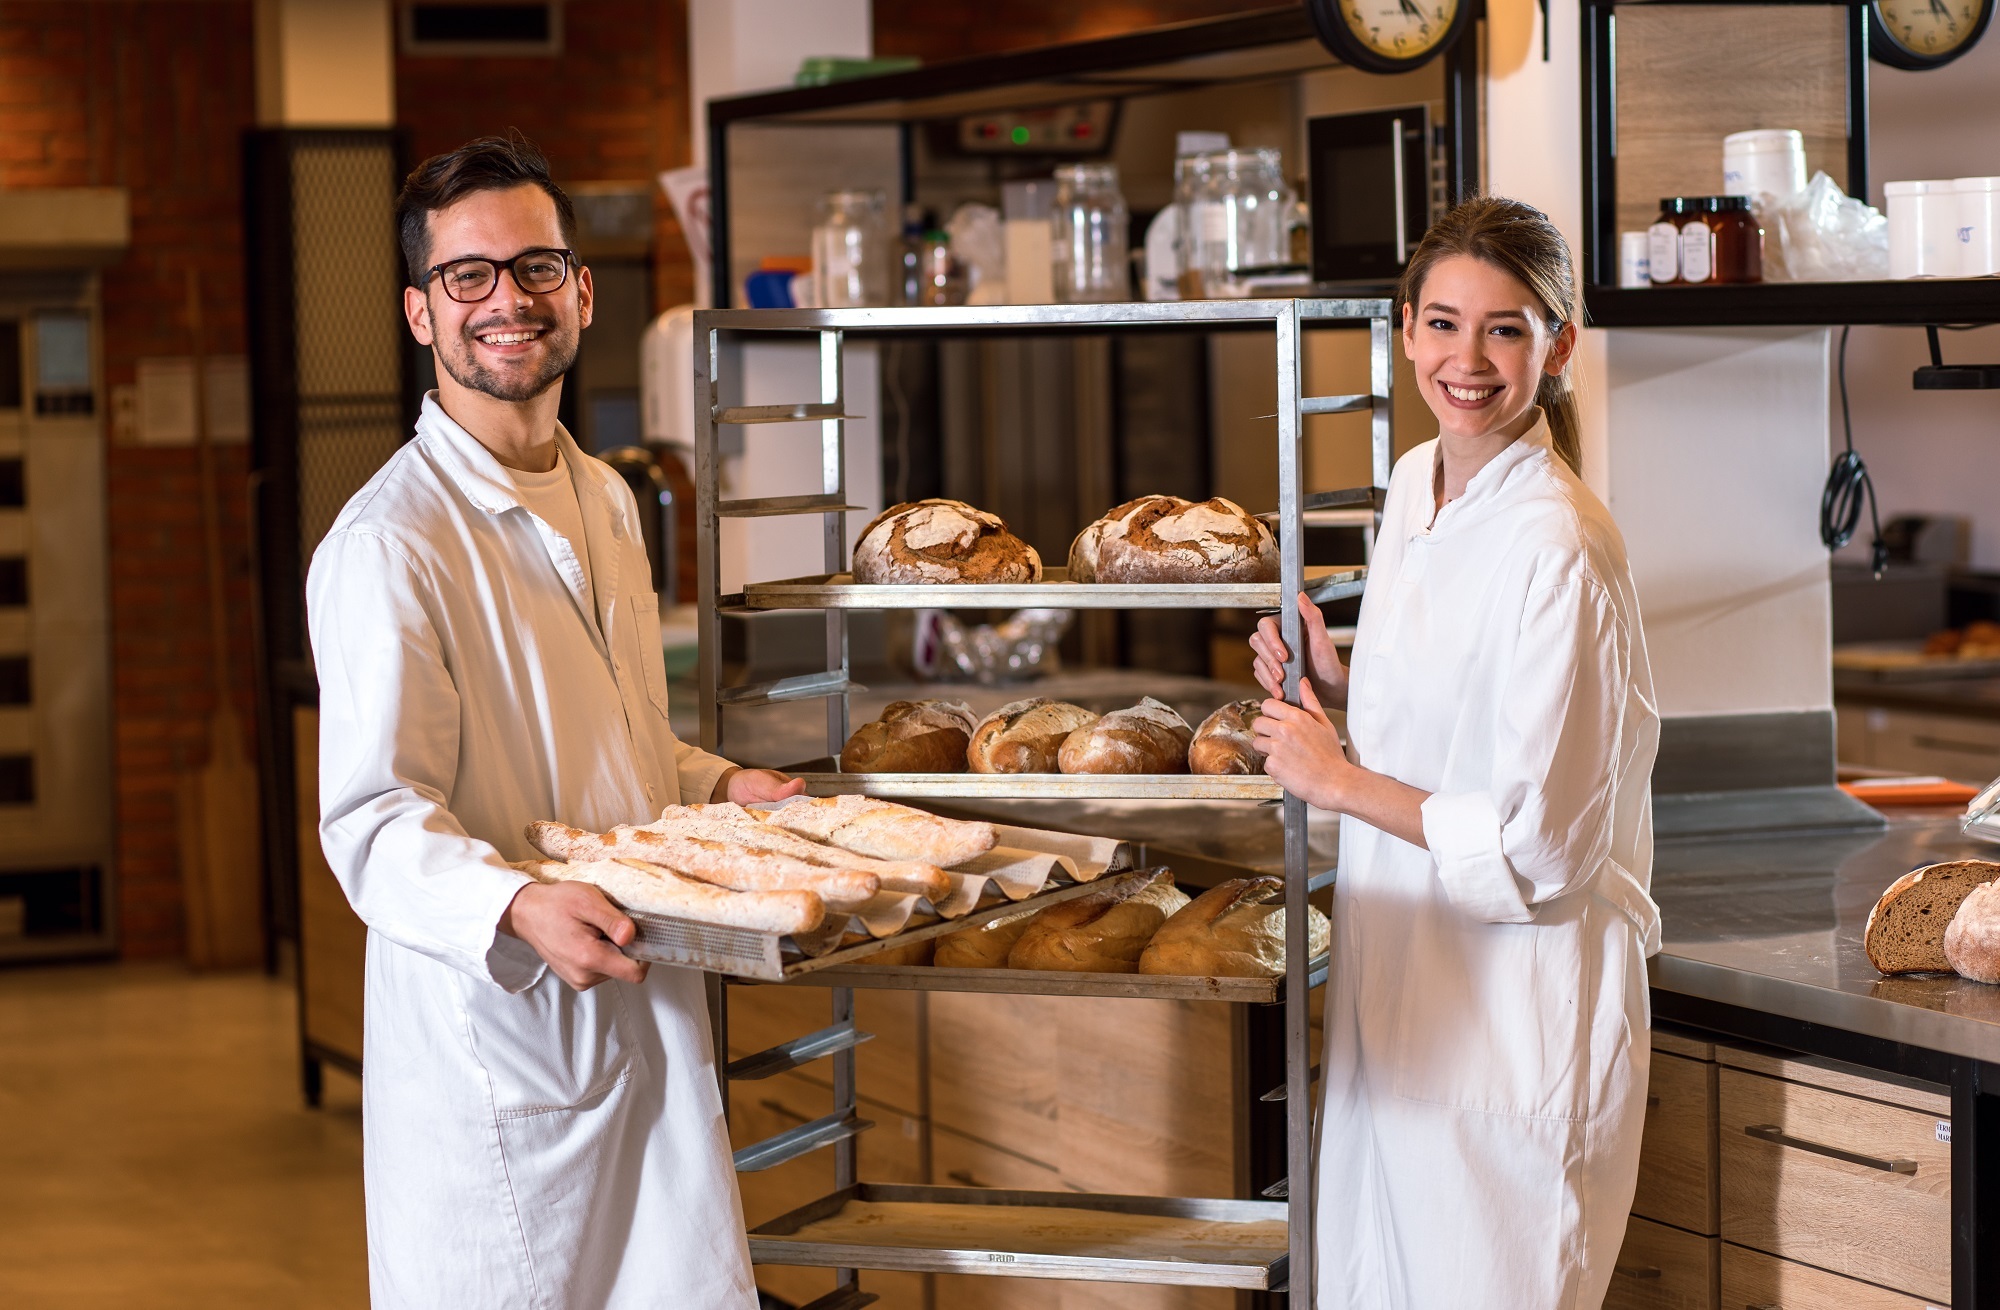 bakery shop business plan in philippines